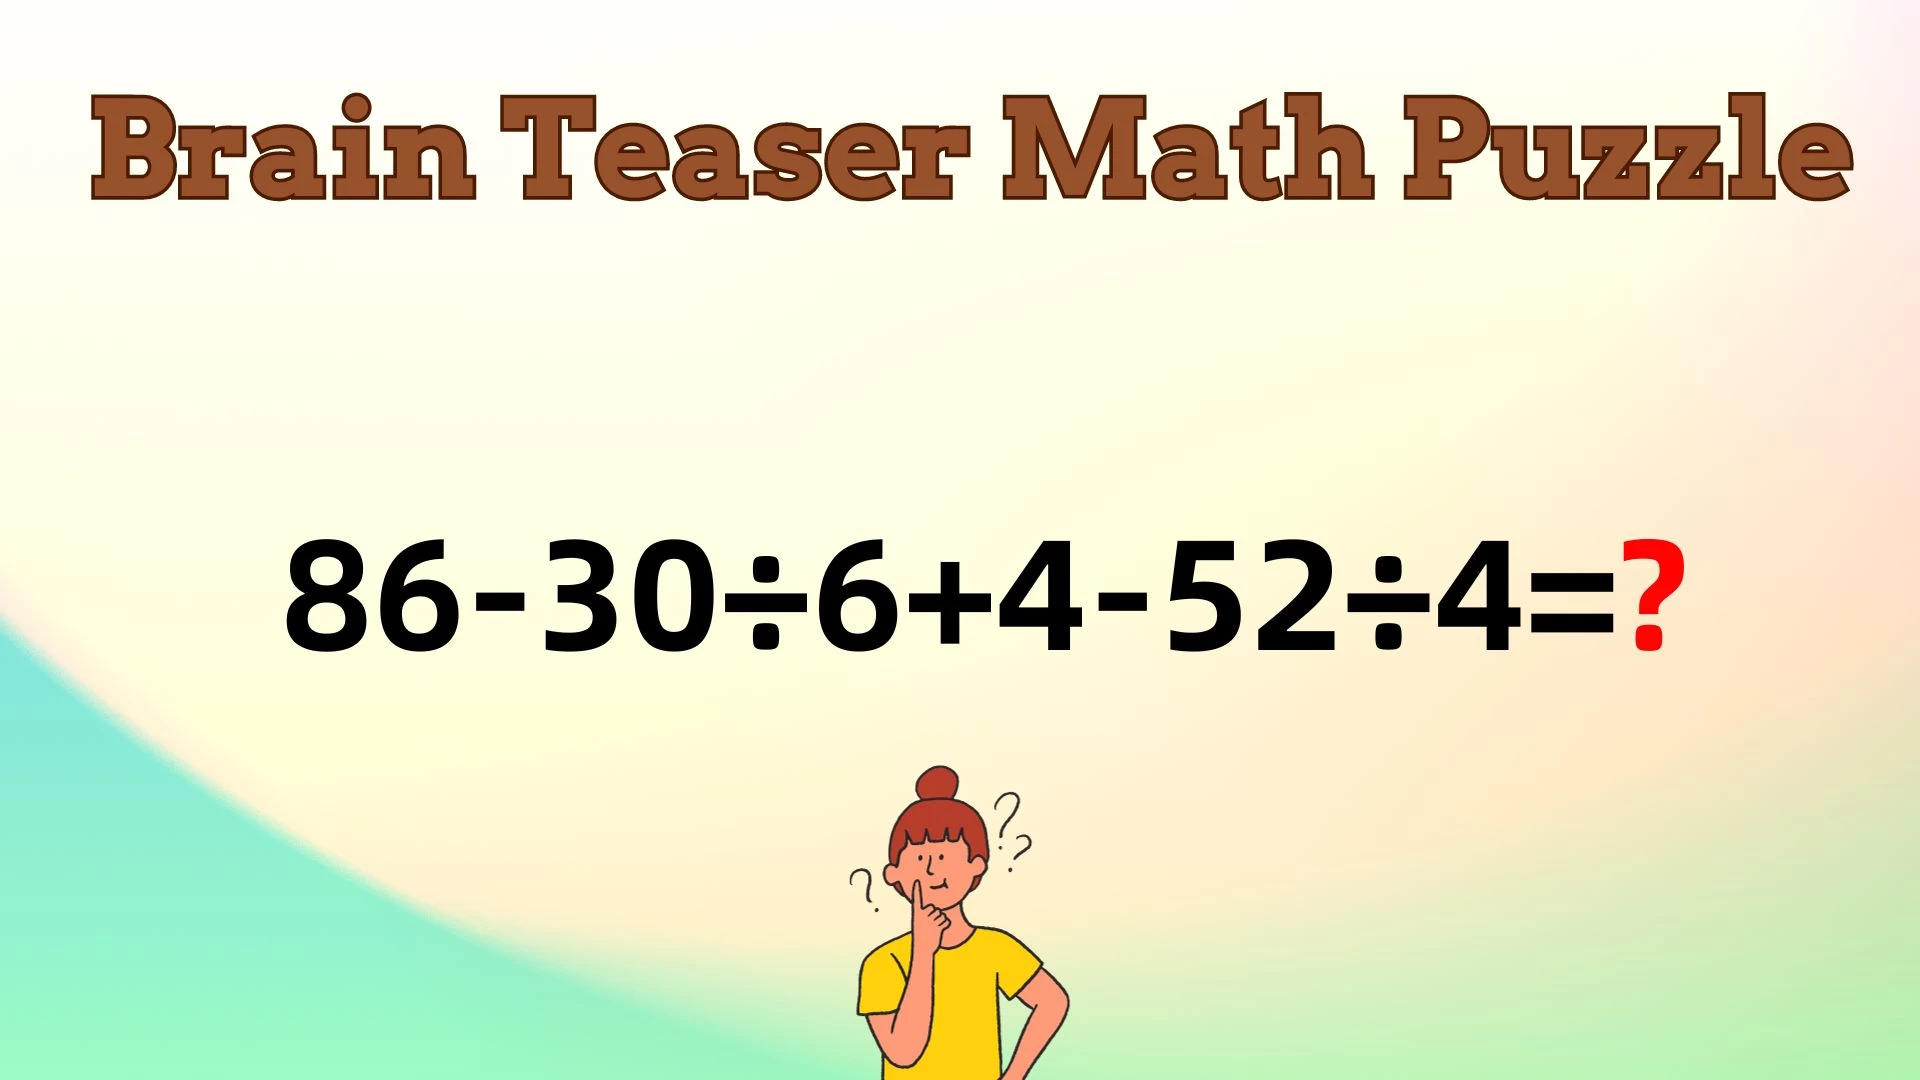 Can You Solve This Math Puzzle Equating 86-30÷6+4-52÷4=?